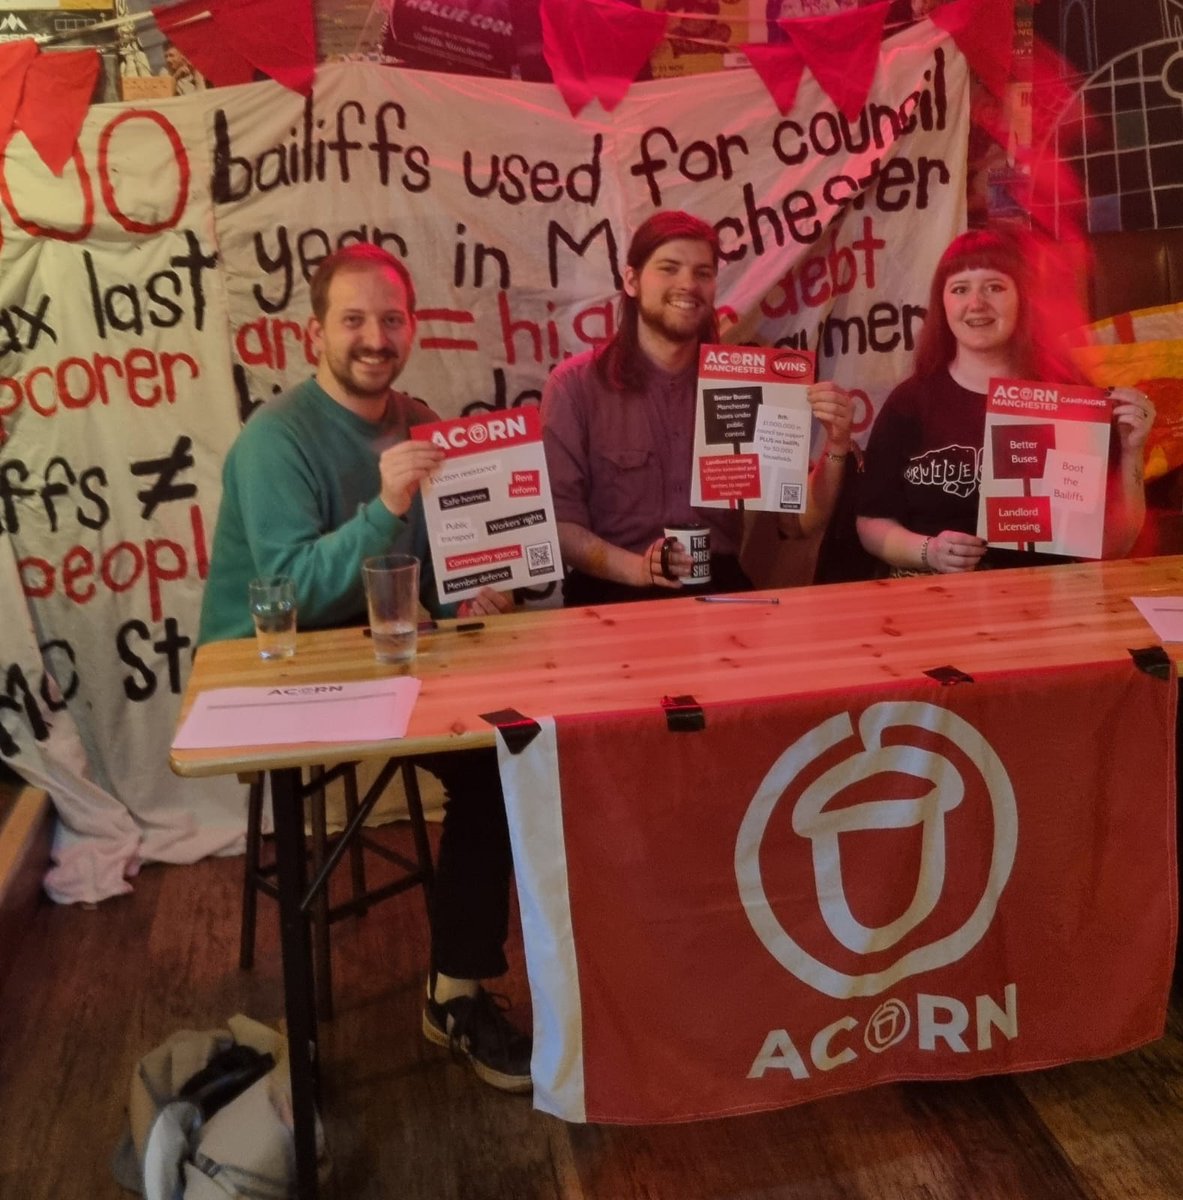 We had a stall last Friday and Saturday in the Flour & Flagon pub as a part of Manchester Punk Festival. We were talking to people about our Boot the Bailiff campaign win💪and asking people to join ACORN. To join the union sign up here: acorntheunion.org.uk/join